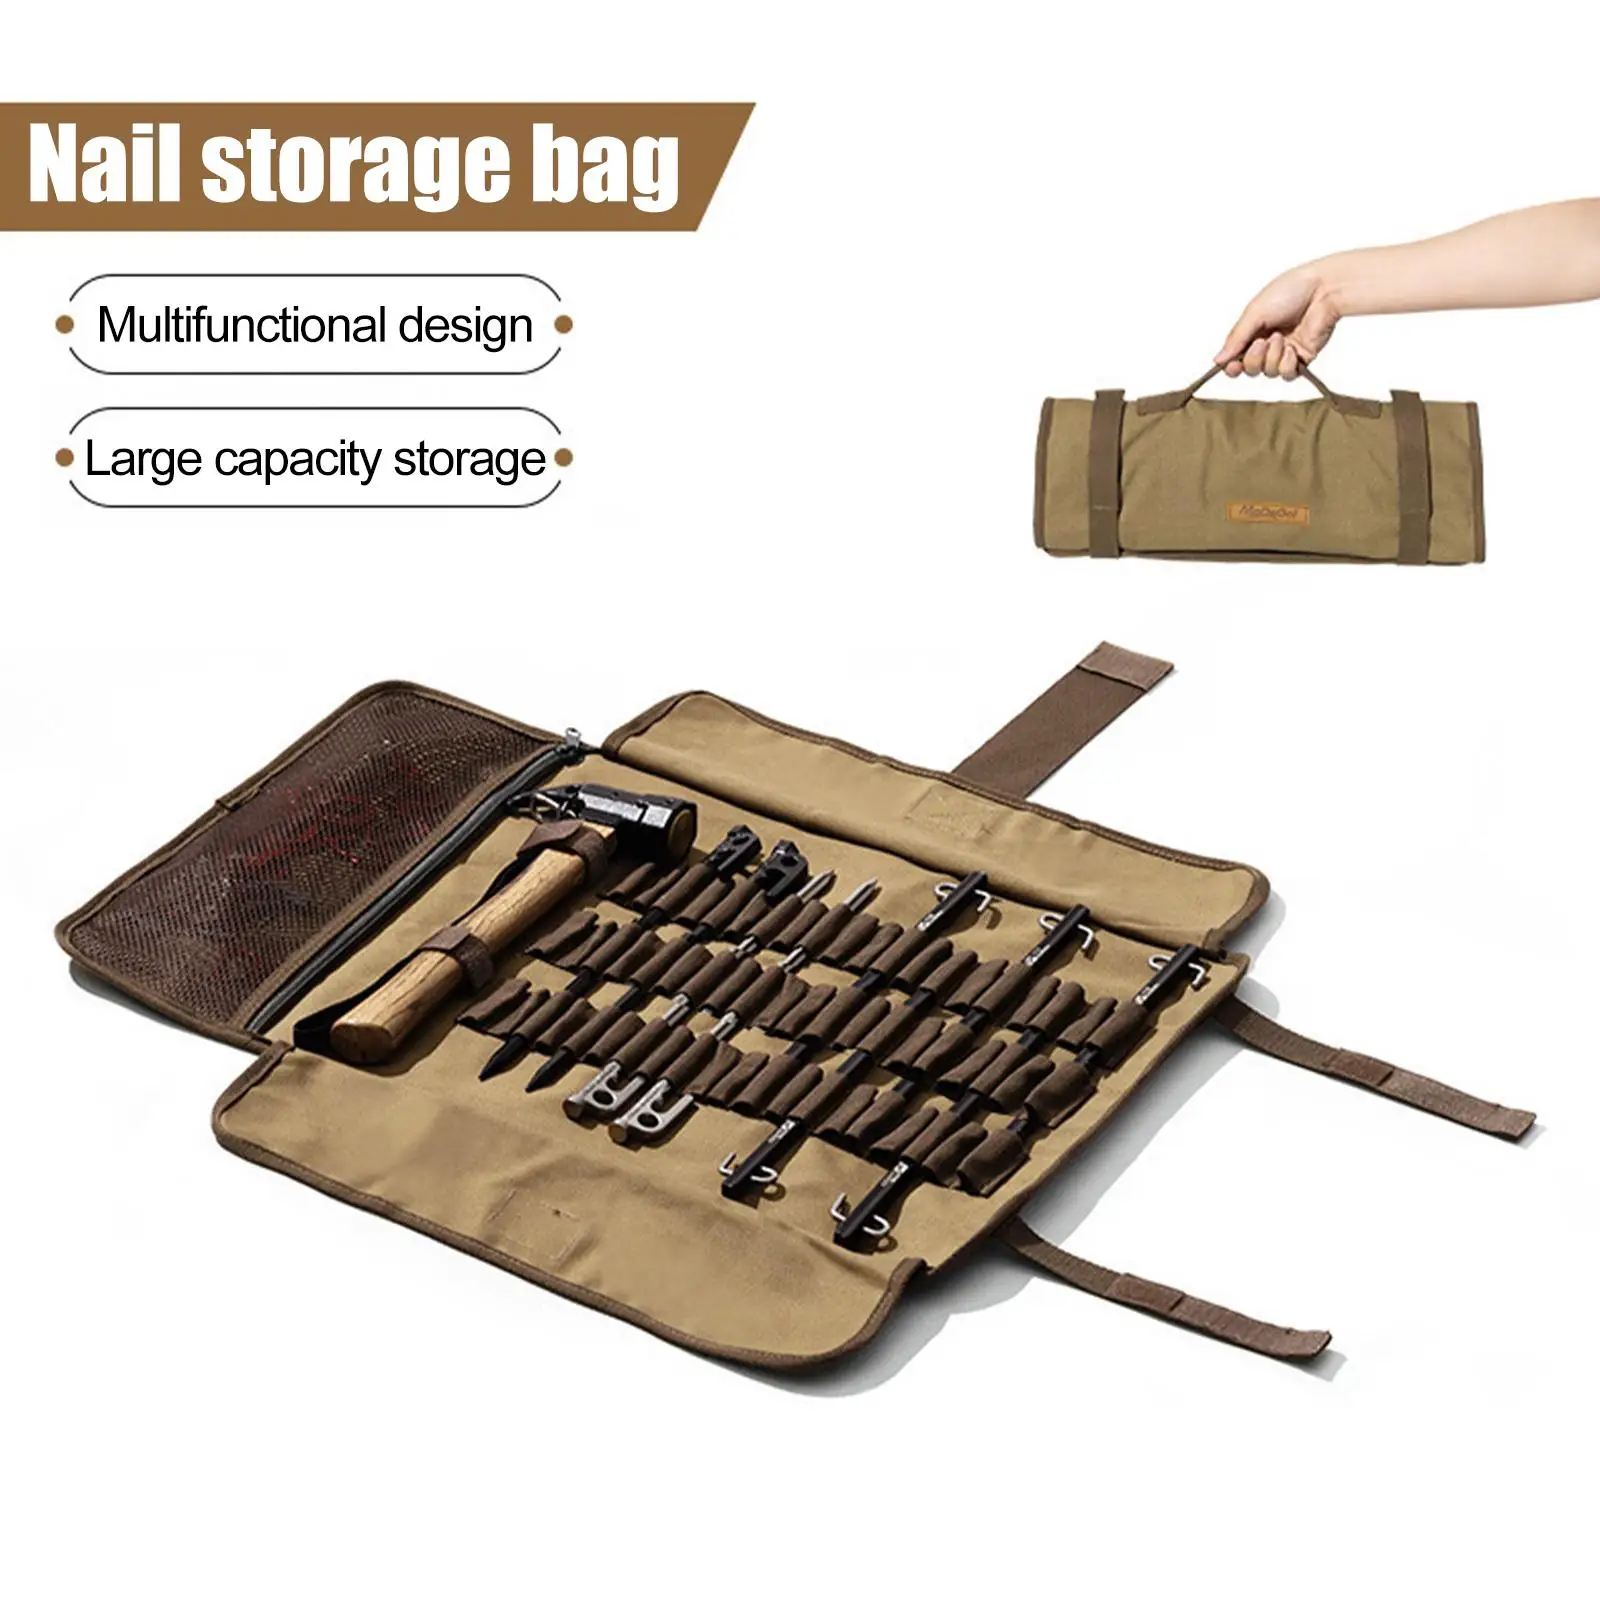 Tent Stake Storage Bag Tent Pegs Pouch Holder Case Oxford Cloth Heavy Duty Portable Multifunctional Outdoor Camping Nail Bag